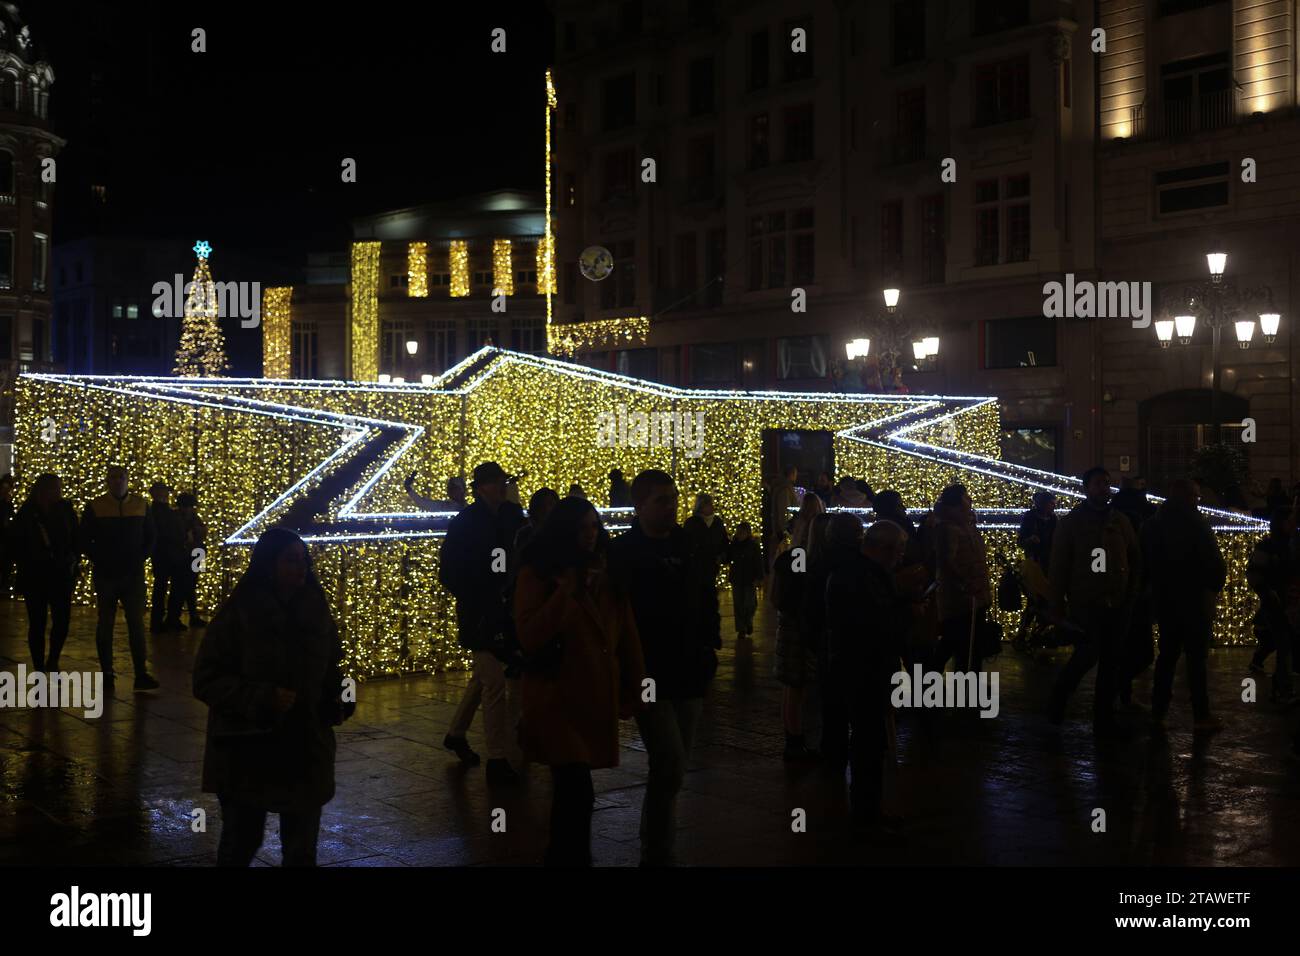 Oviedo, Spain, December 2nd, 2023: A star illuminated during the Christmas Lighting and Market, on December 2, 2023, in Oviedo, Spain. Credit: Alberto Brevers / Alamy Live News. Stock Photo